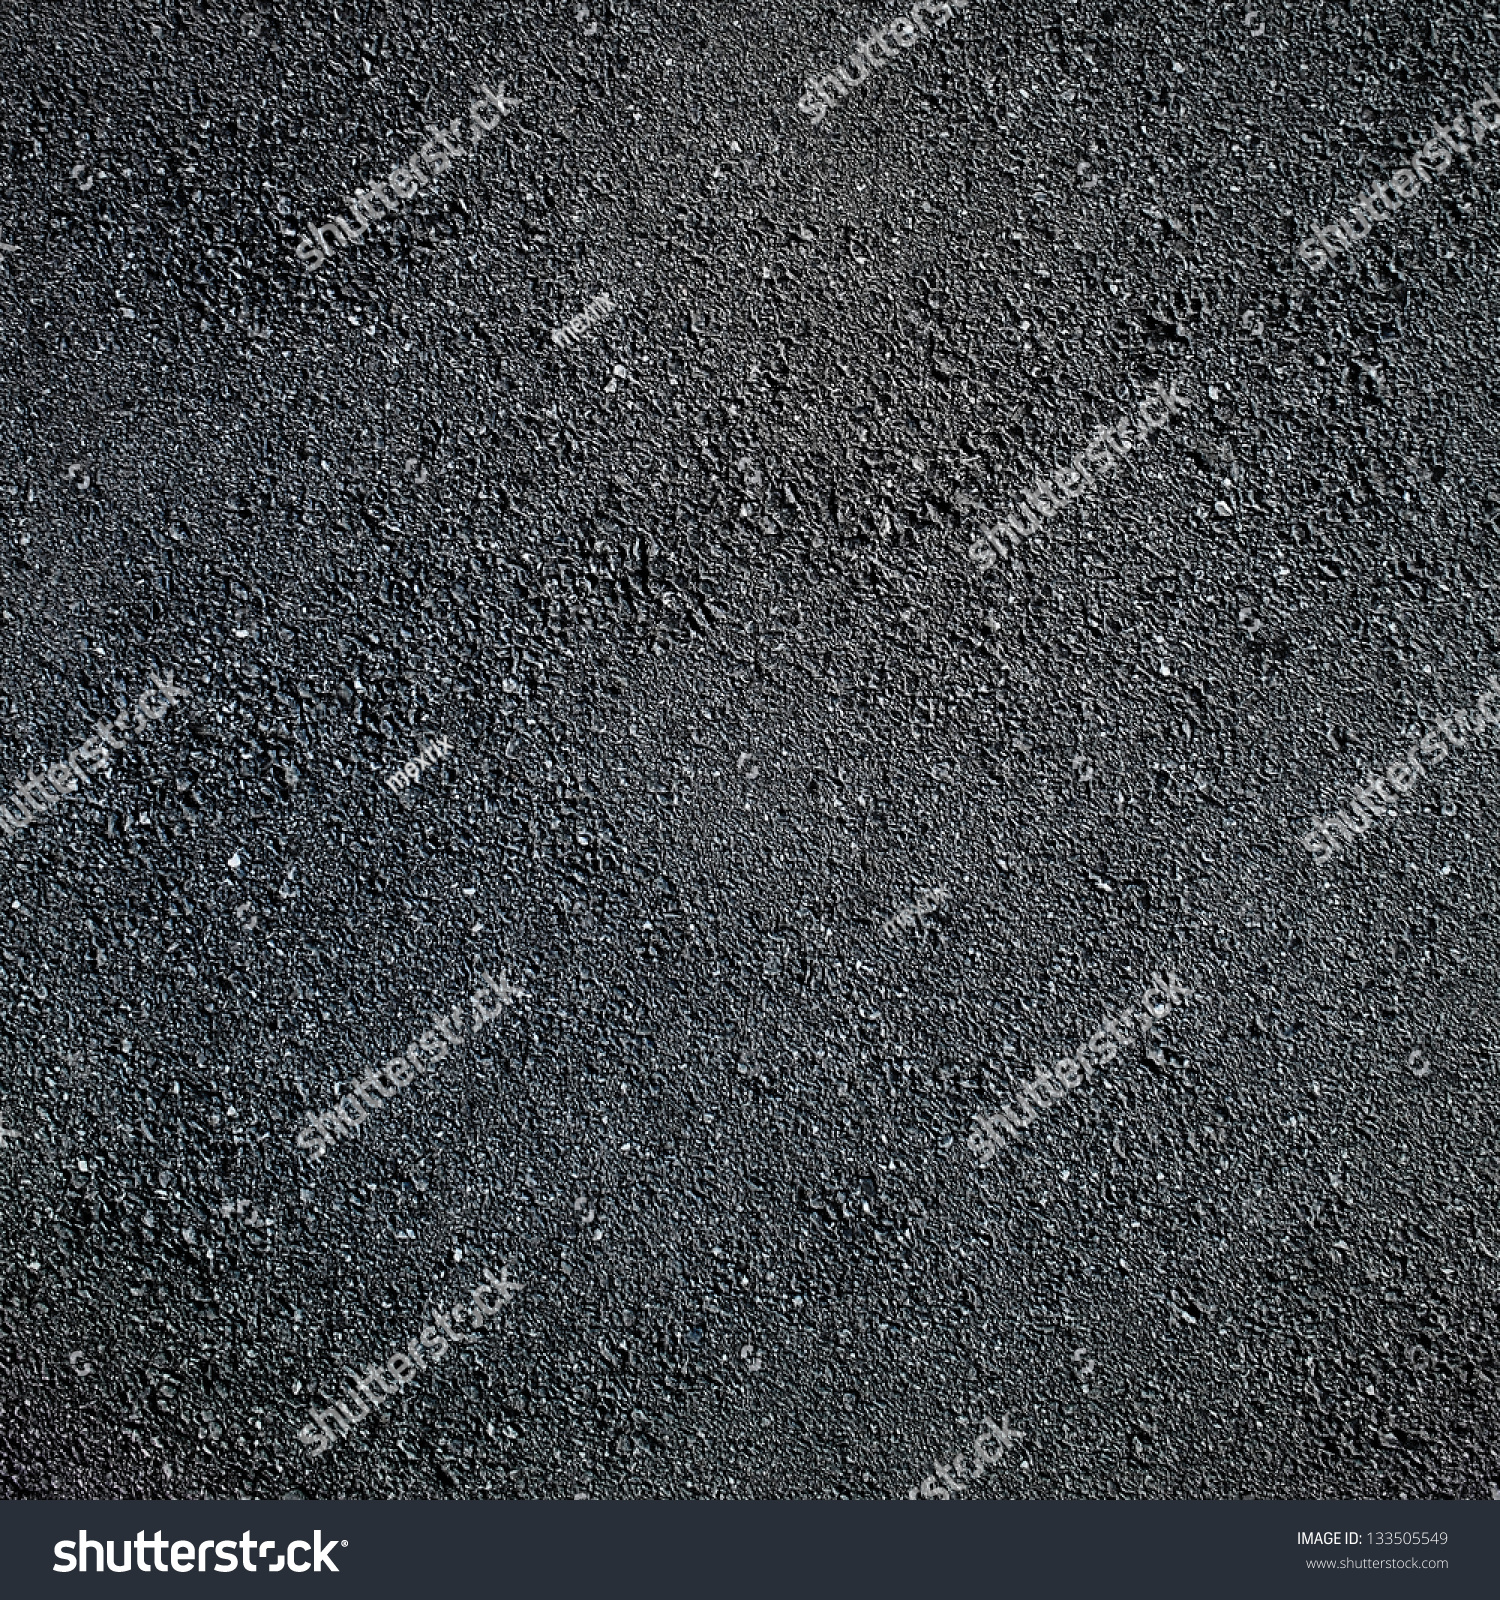 Road Surface Of The Asphalt Stock Photo 133505549 : Shutterstock